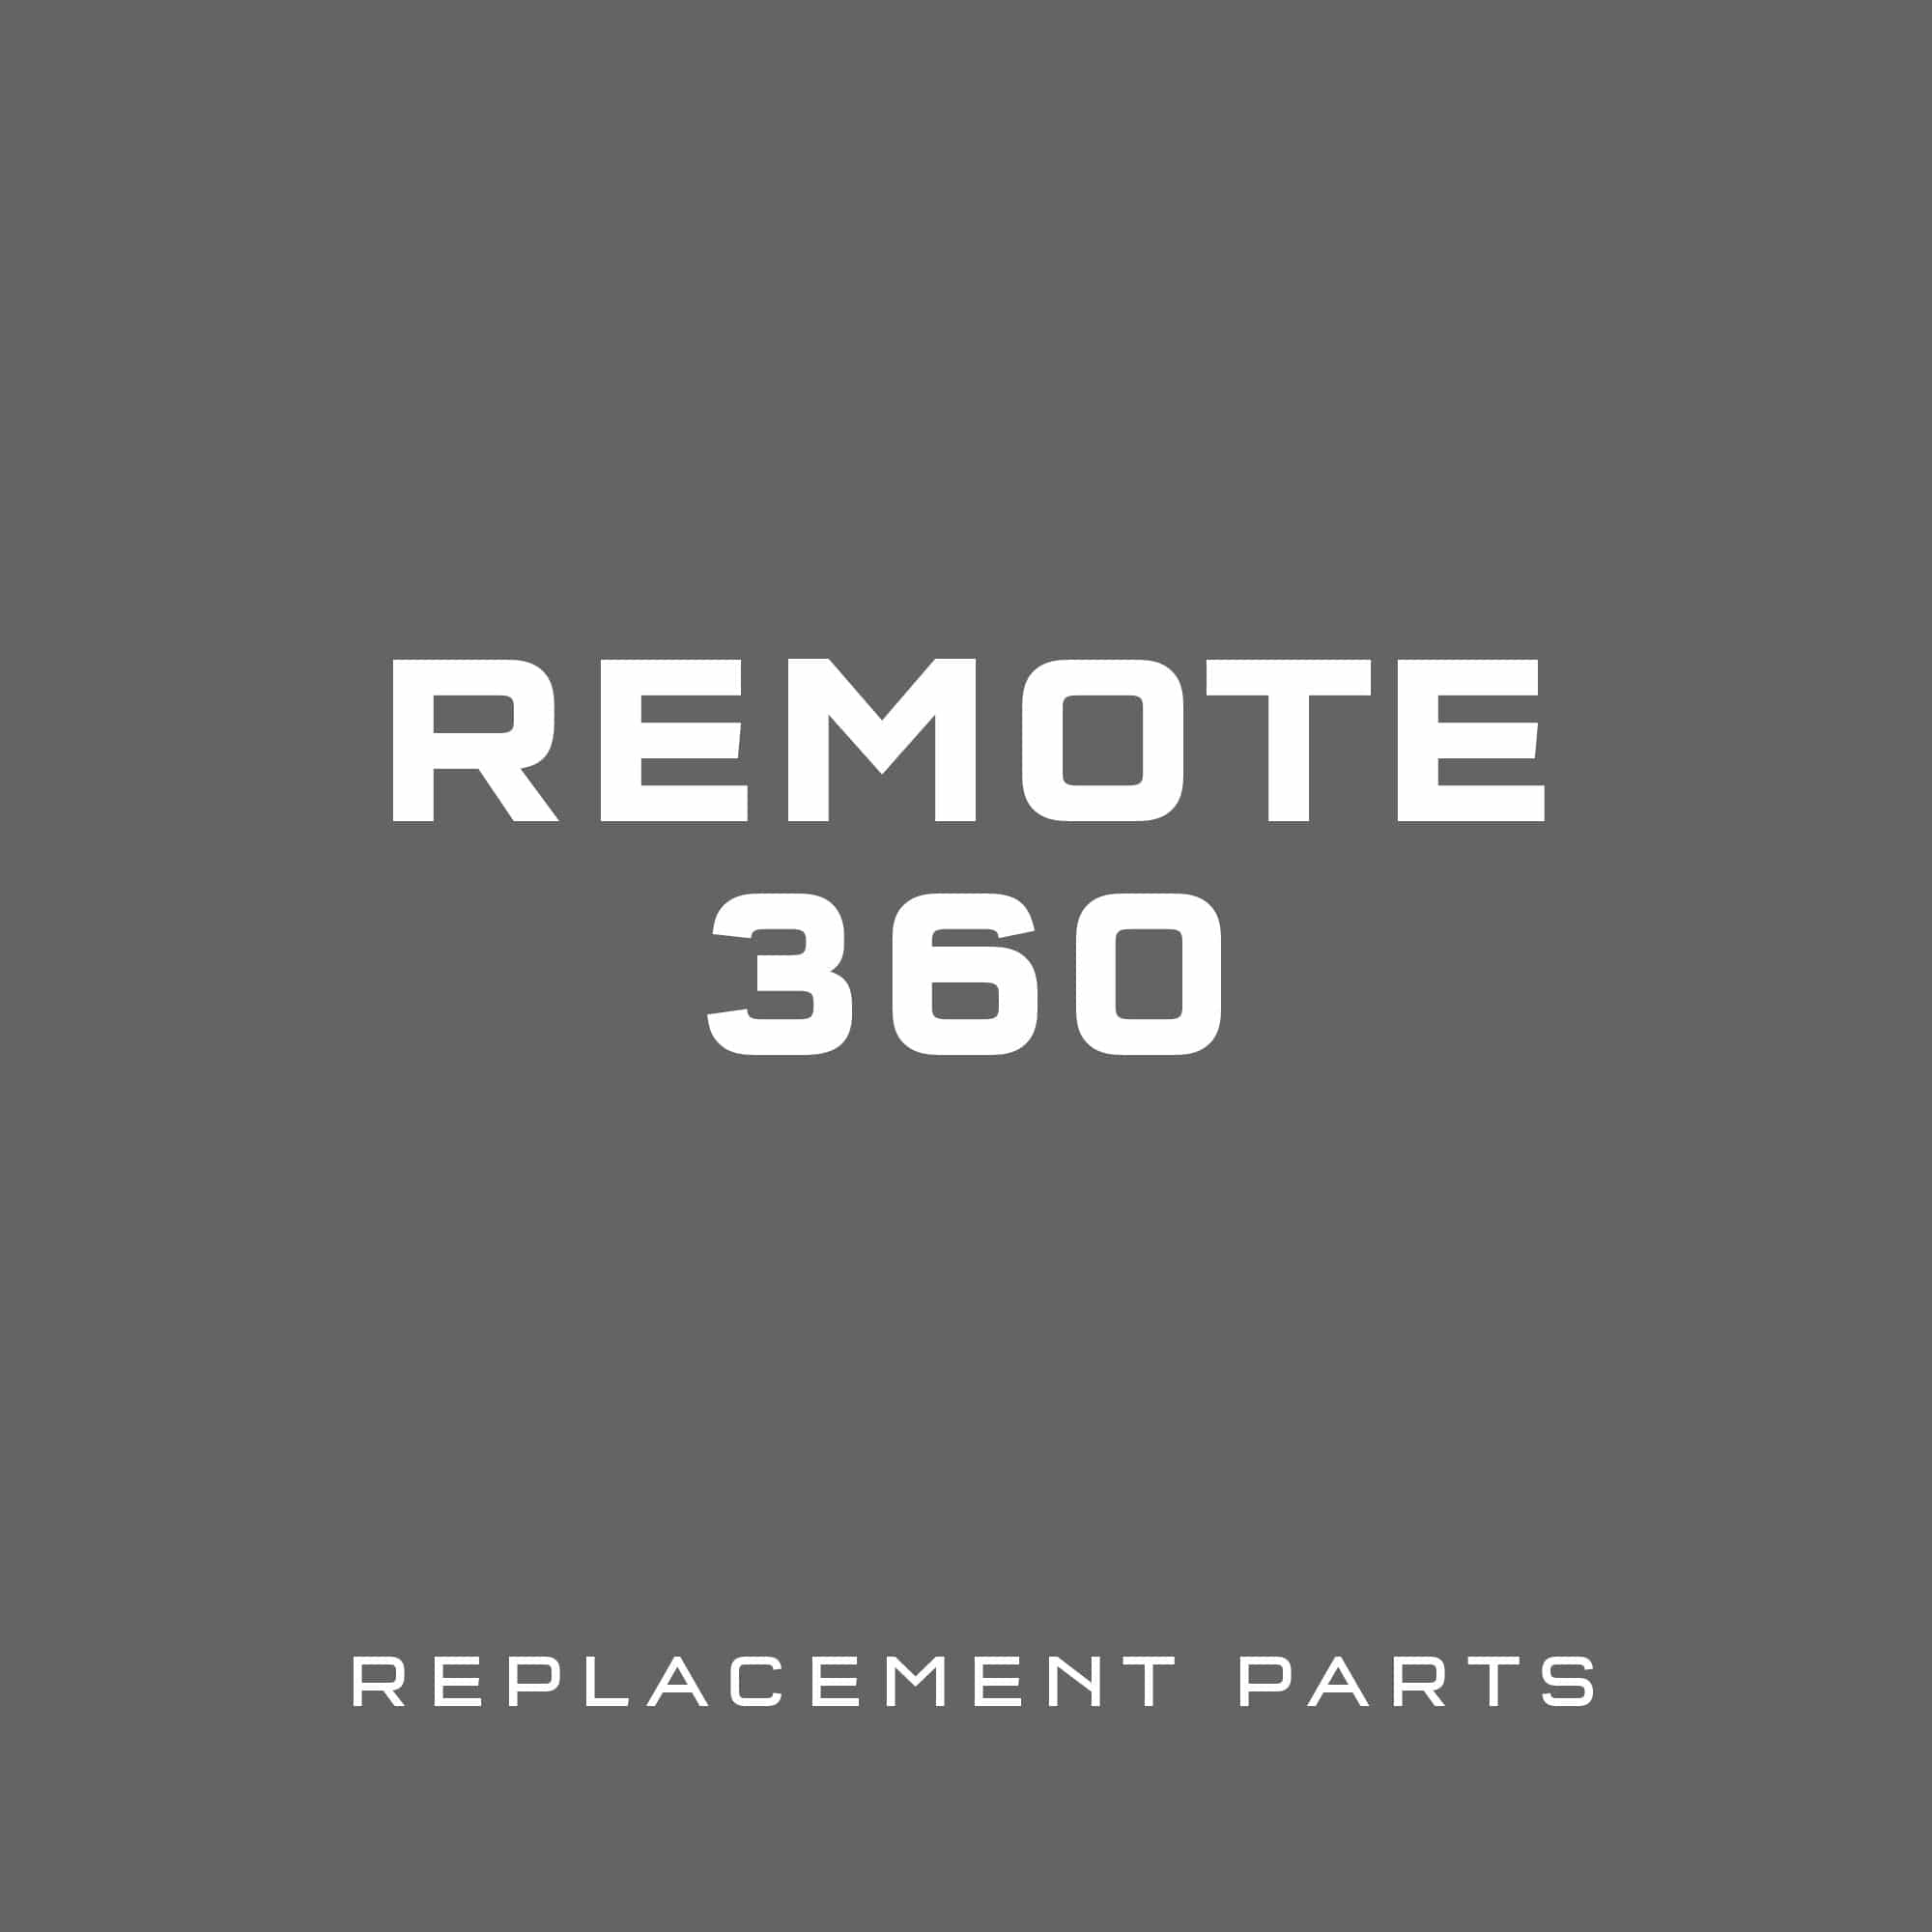 ReMote 360 Replacement Parts